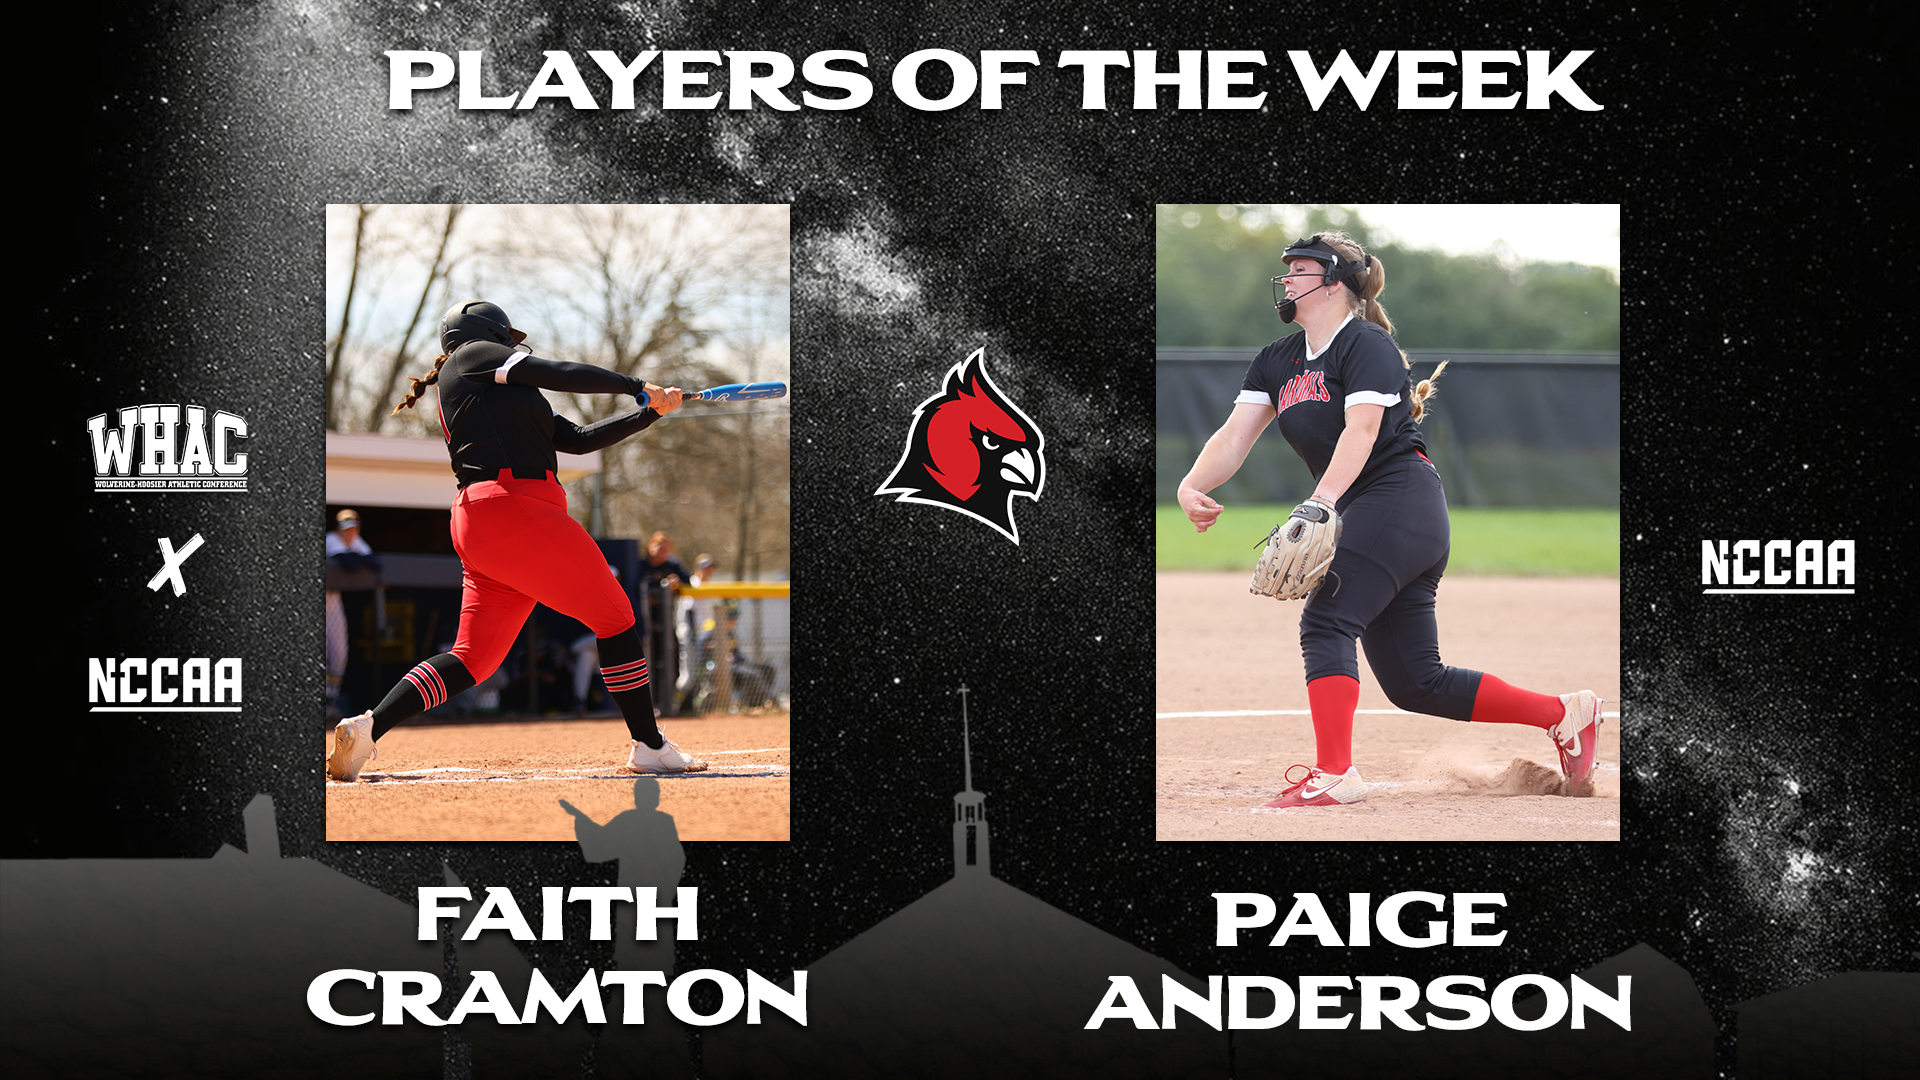 Faith Cramton earns WHAC and NCCAA Player of the Week; Paige Anderson takes home NCCAA Pitcher of the Week